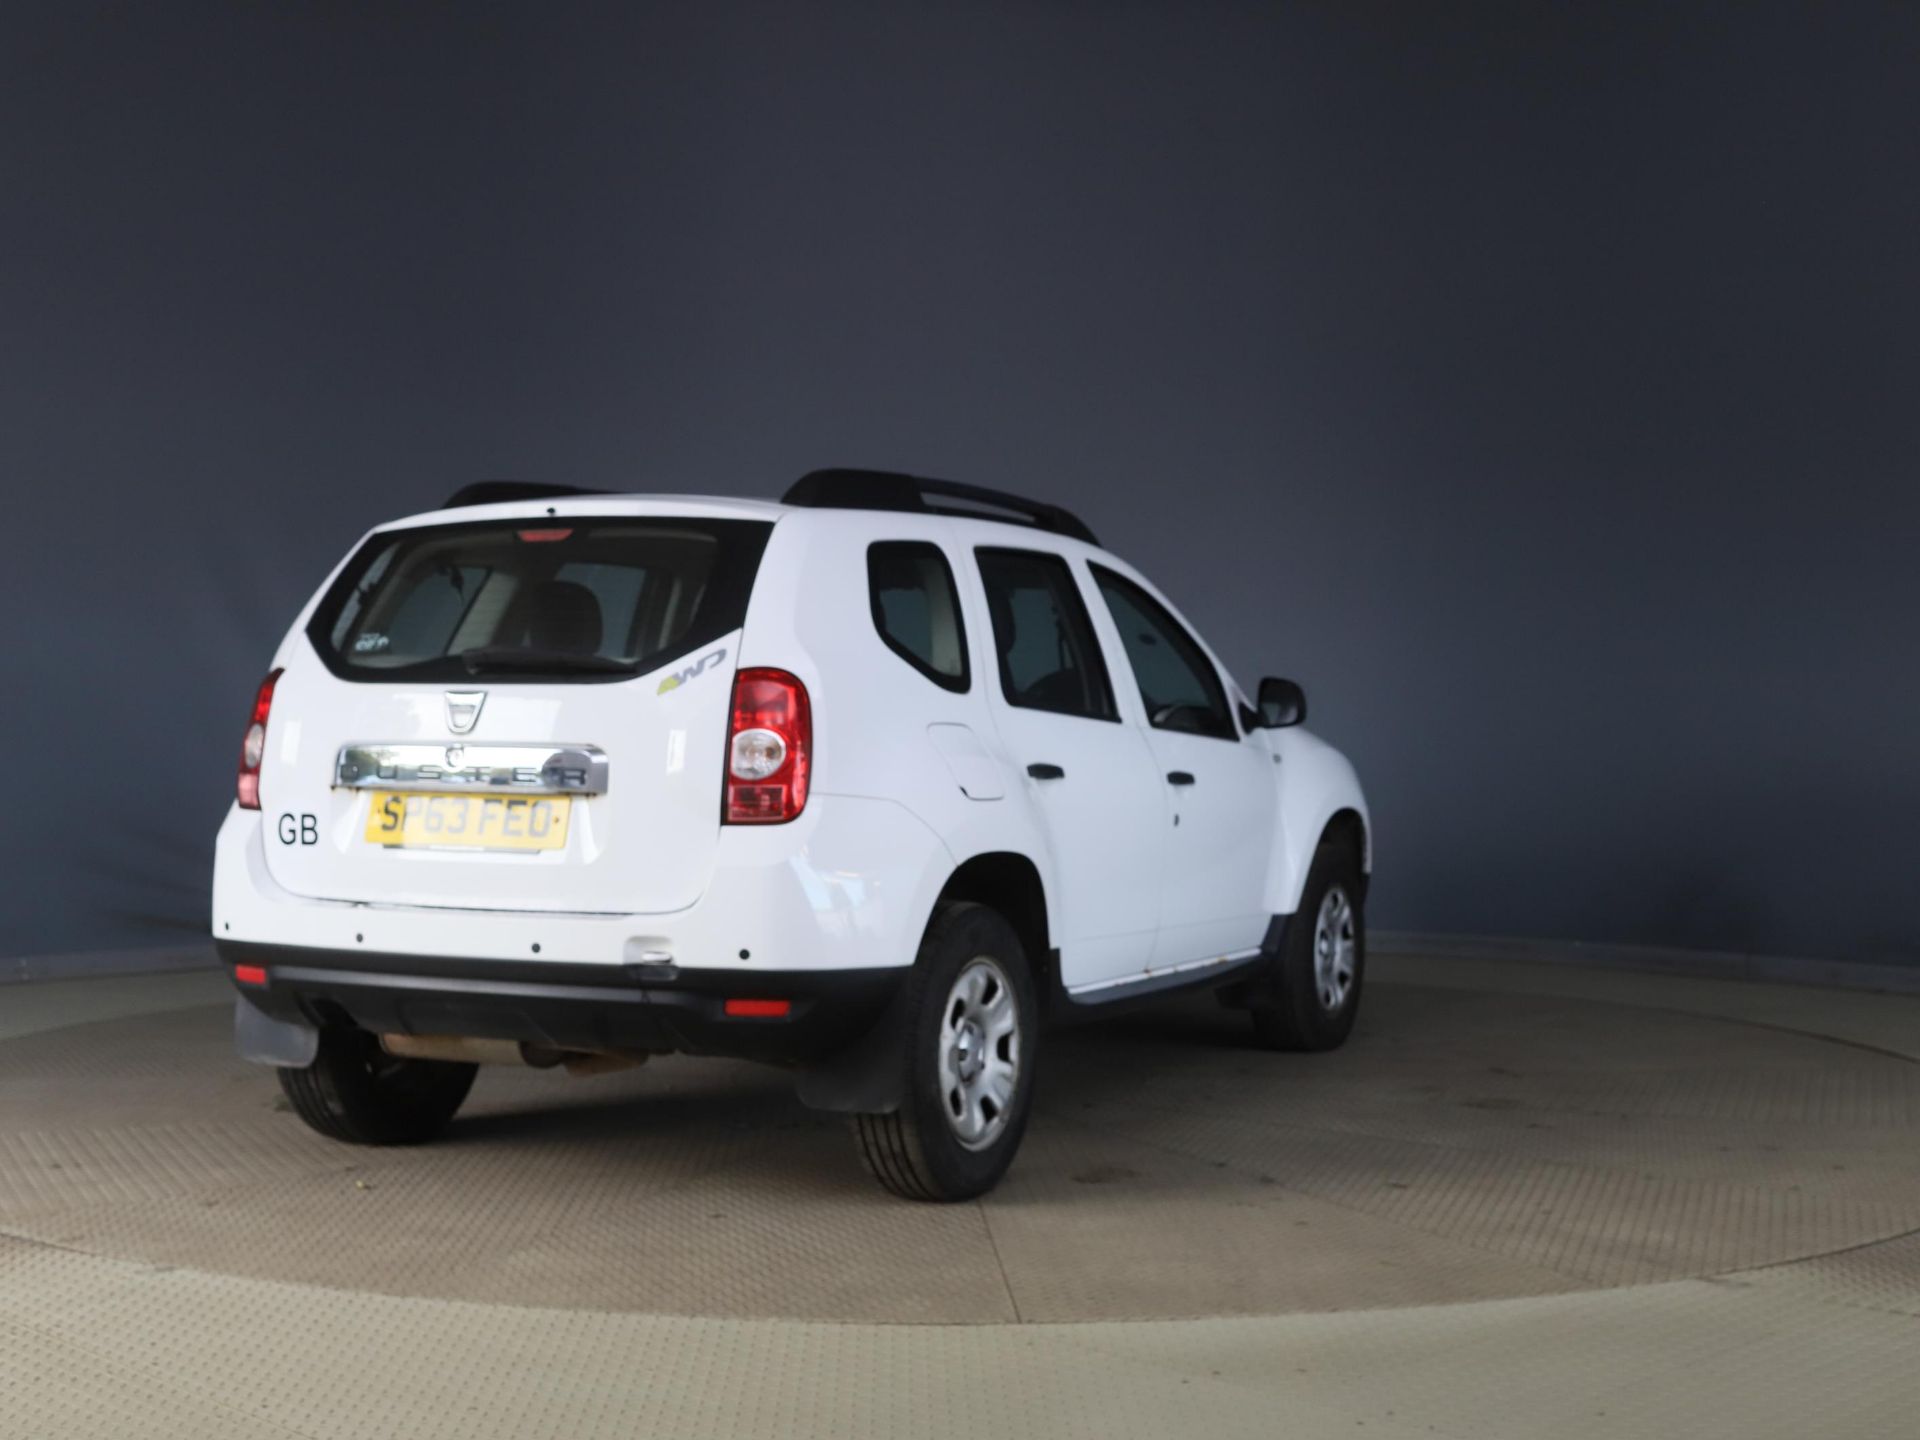 Dacia Duster 1.5 Dci 110 Ambiance 4x4 63reg - 2014 Model White - No Vat Save 20% - Image 6 of 11